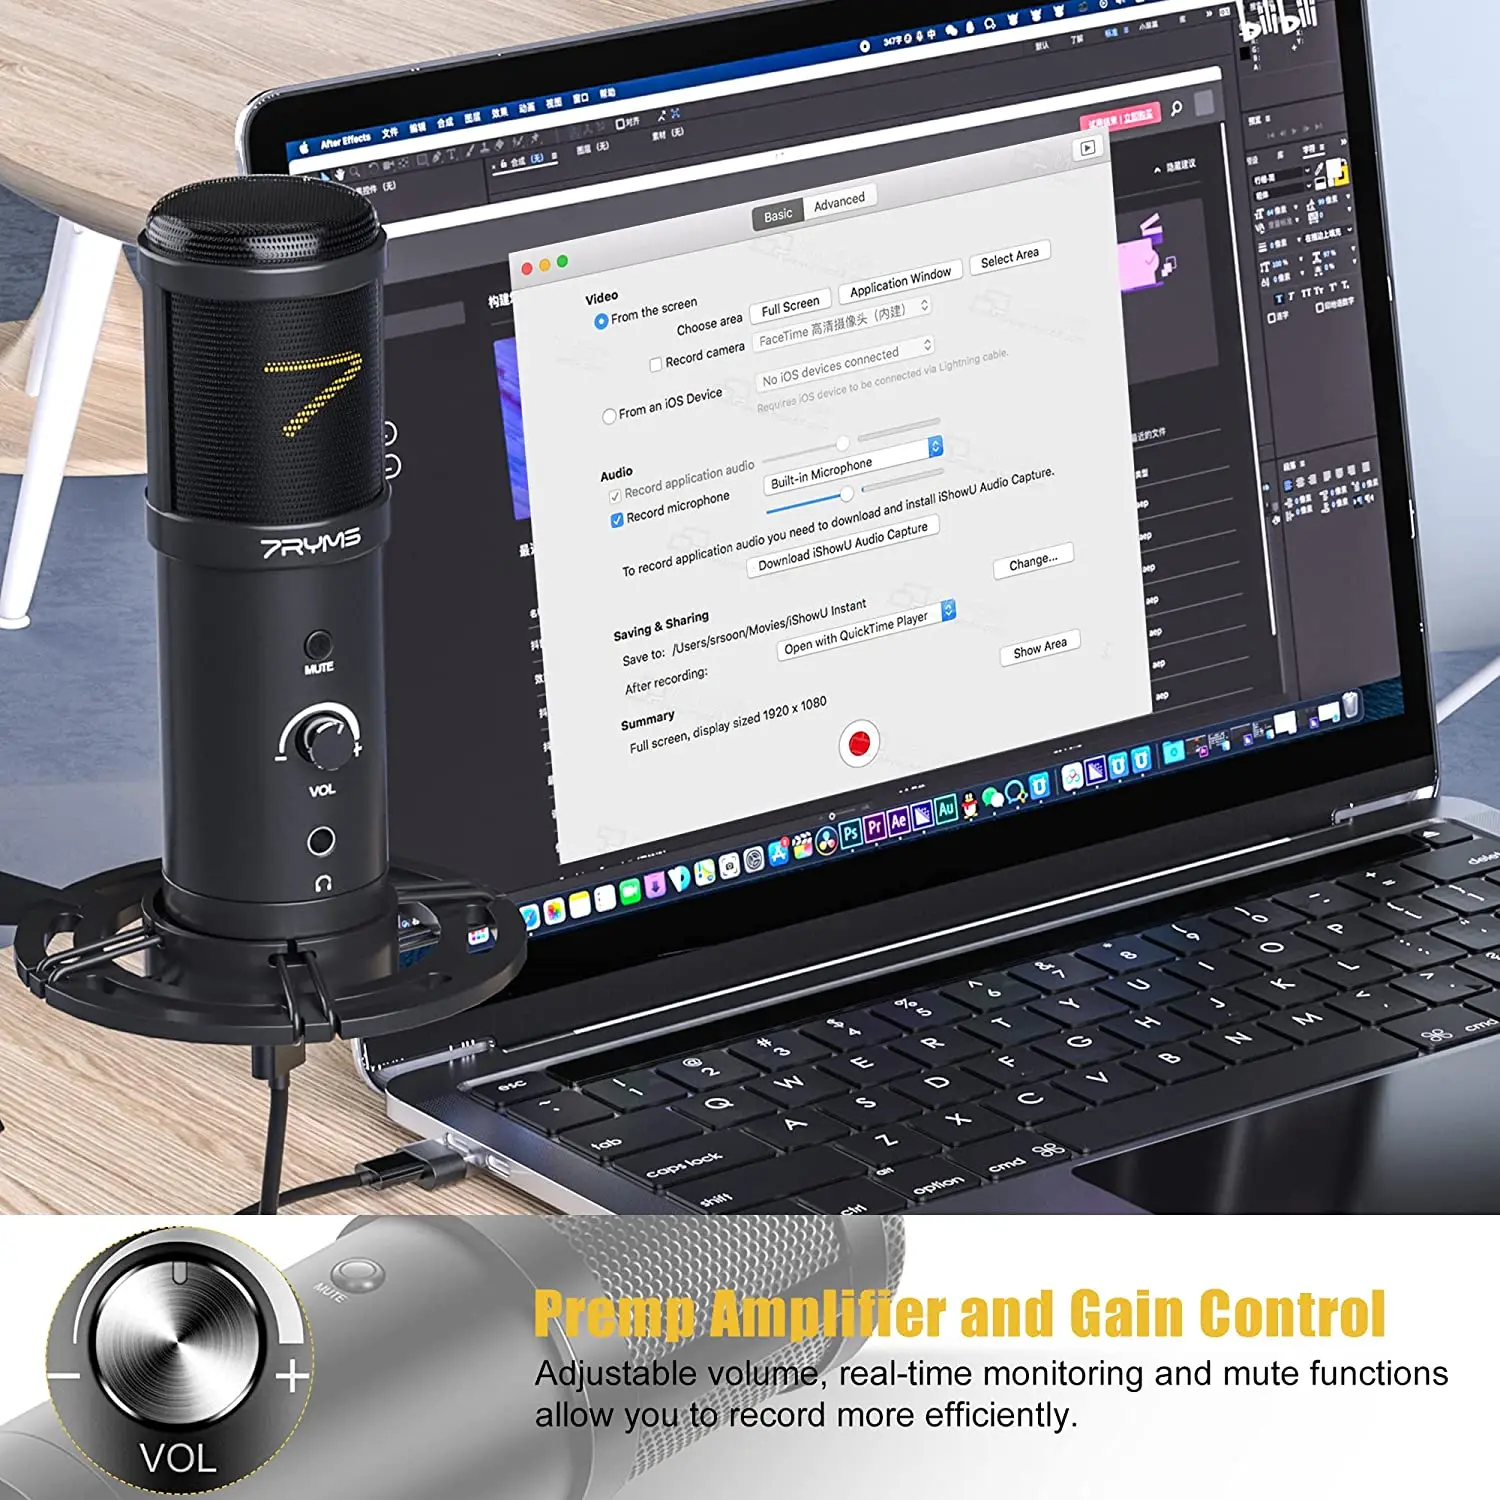 7RYMS Condenser USB Microphone SR-AU01-K2 PC Microphone Kit with Shock Mount and Real-time Monitor for Podcast Live Streaming enlarge